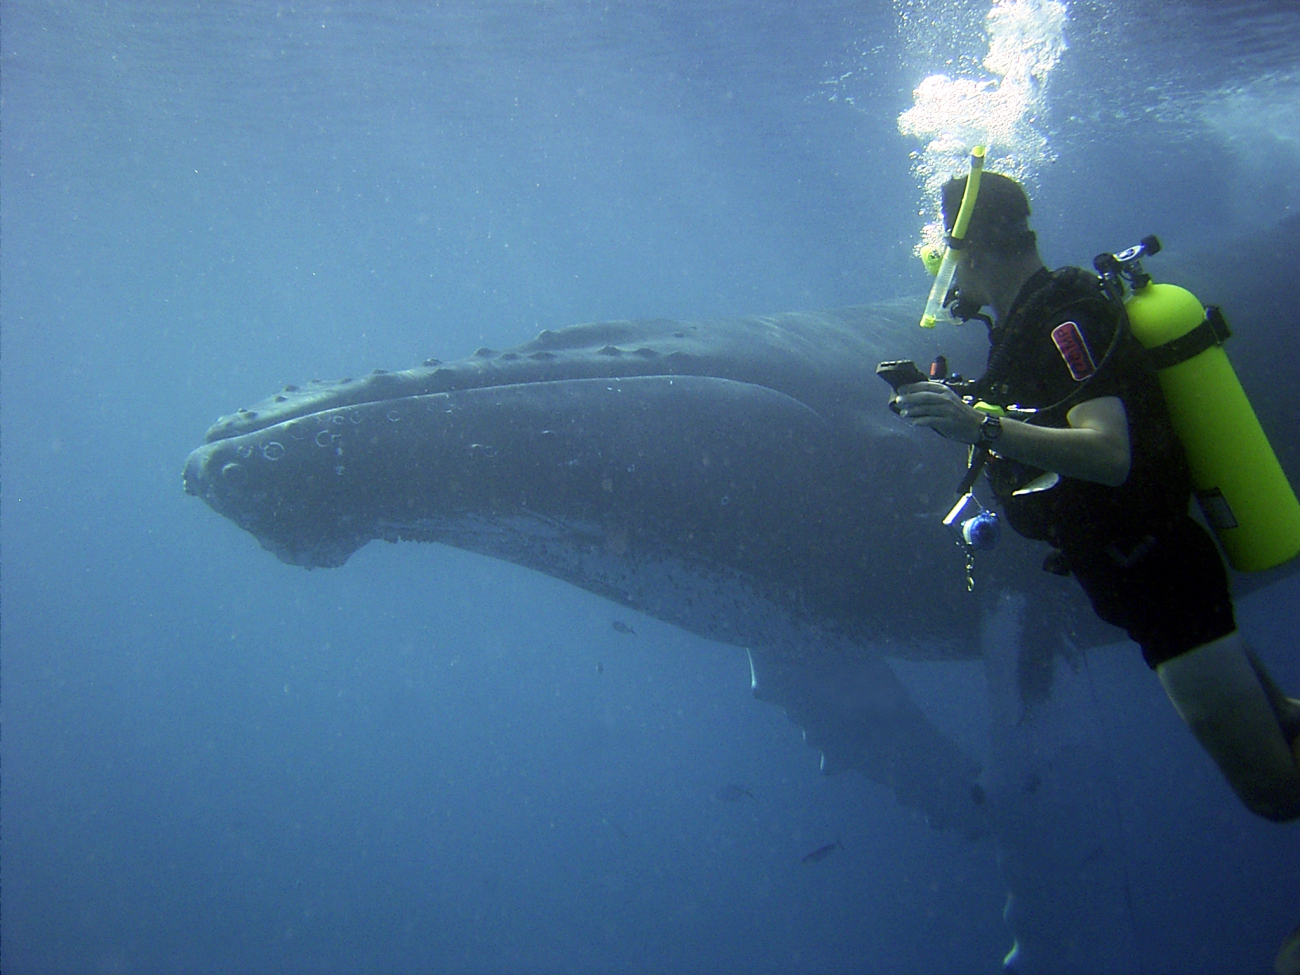 Lieutenant Commander Joe Pica observing a curious humpback whale who came tovisit during recovery of underwater acoustic current meter